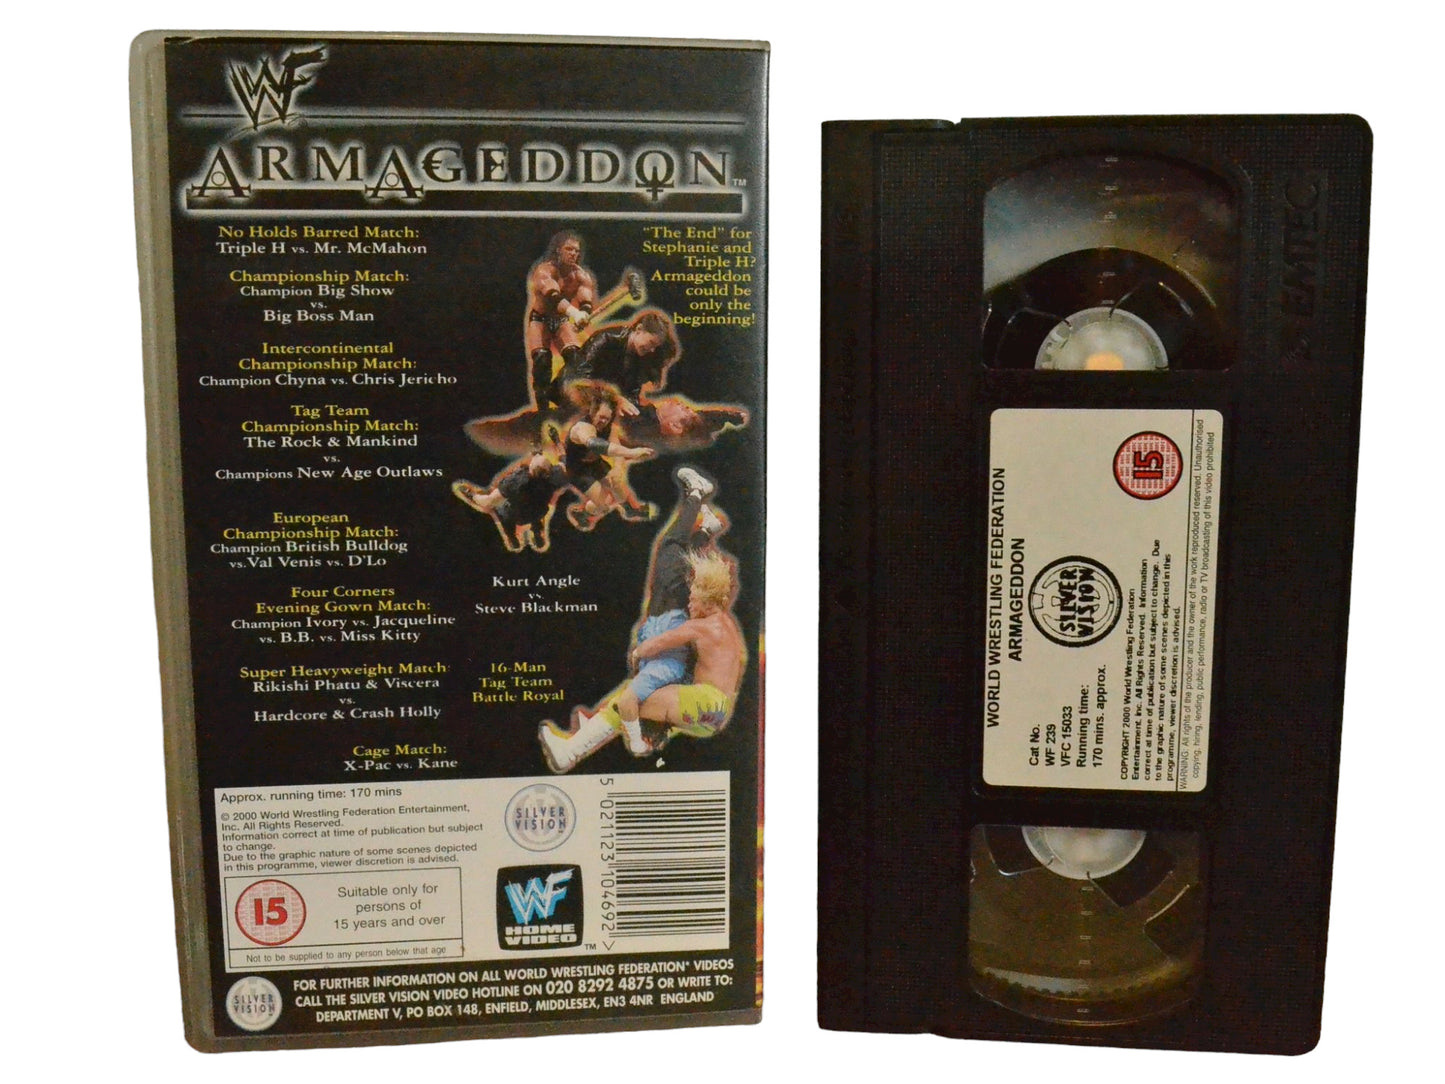 WWF: Armageddon (Exclusive Footage) - Paul Levesque - World Wrestling Federation Home Video - Wrestling - PAL - VHS-